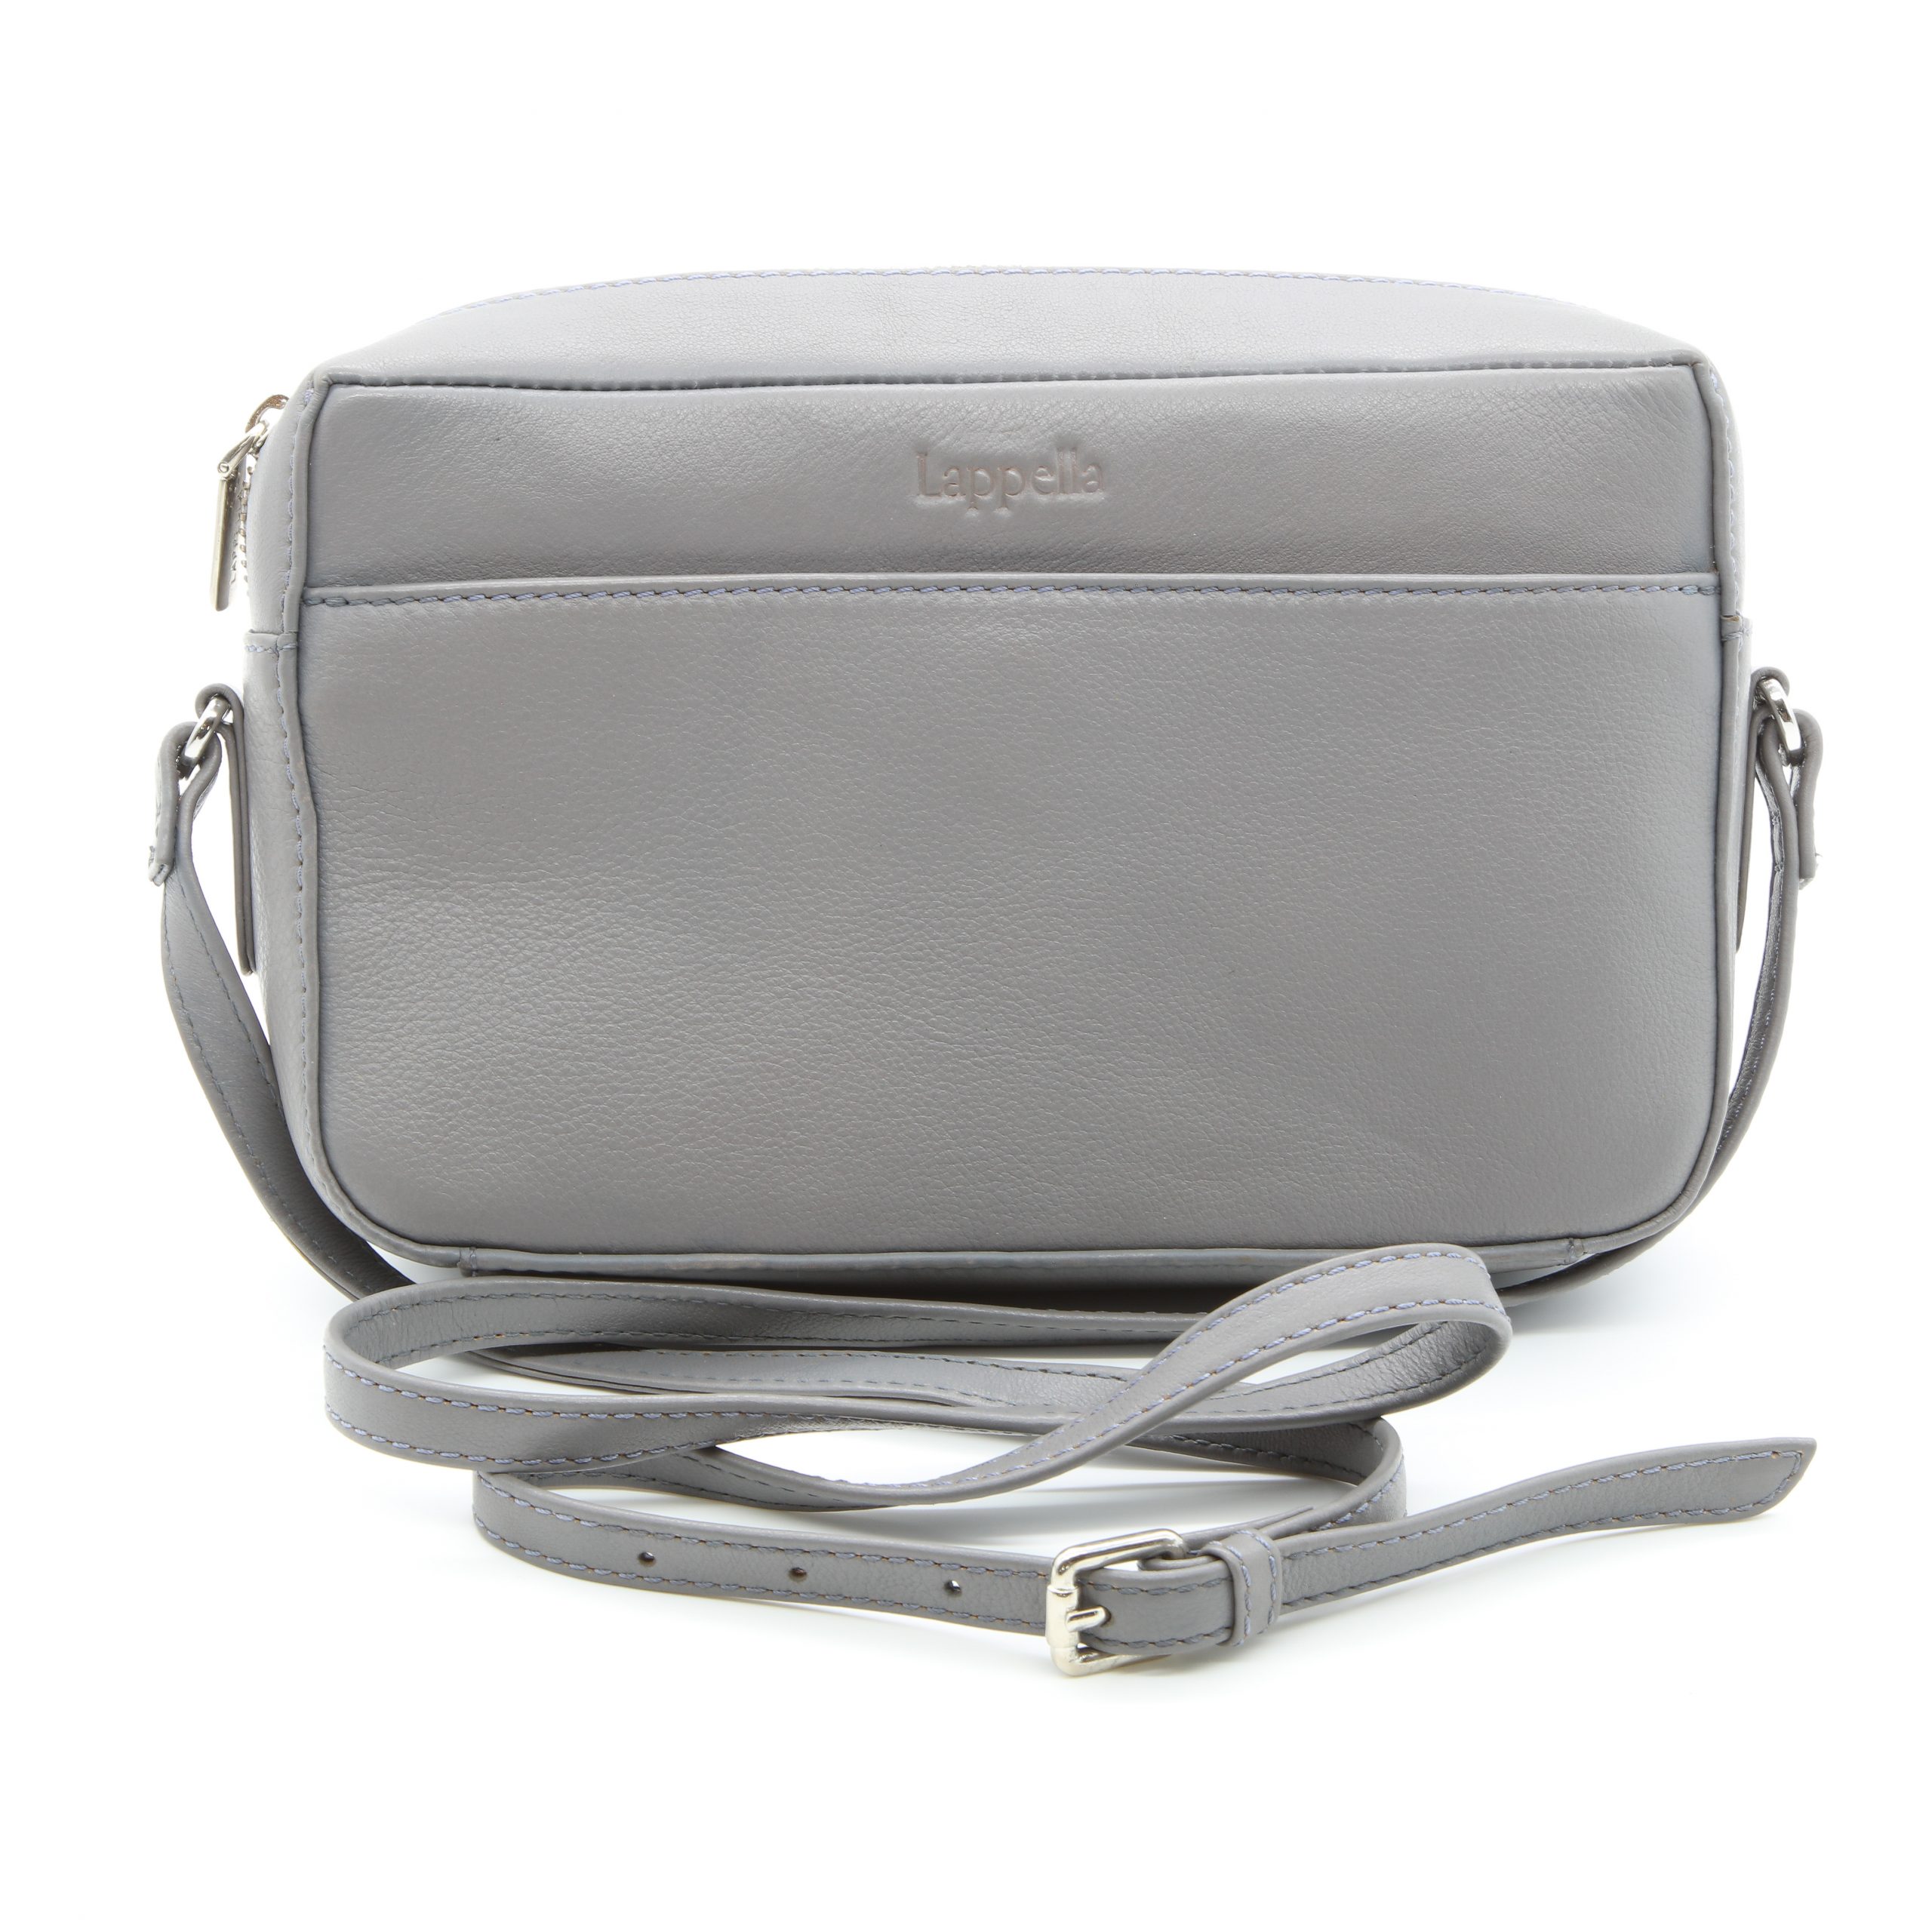 AMY Leather Crossbody Bag - Soft Leather by Lappella